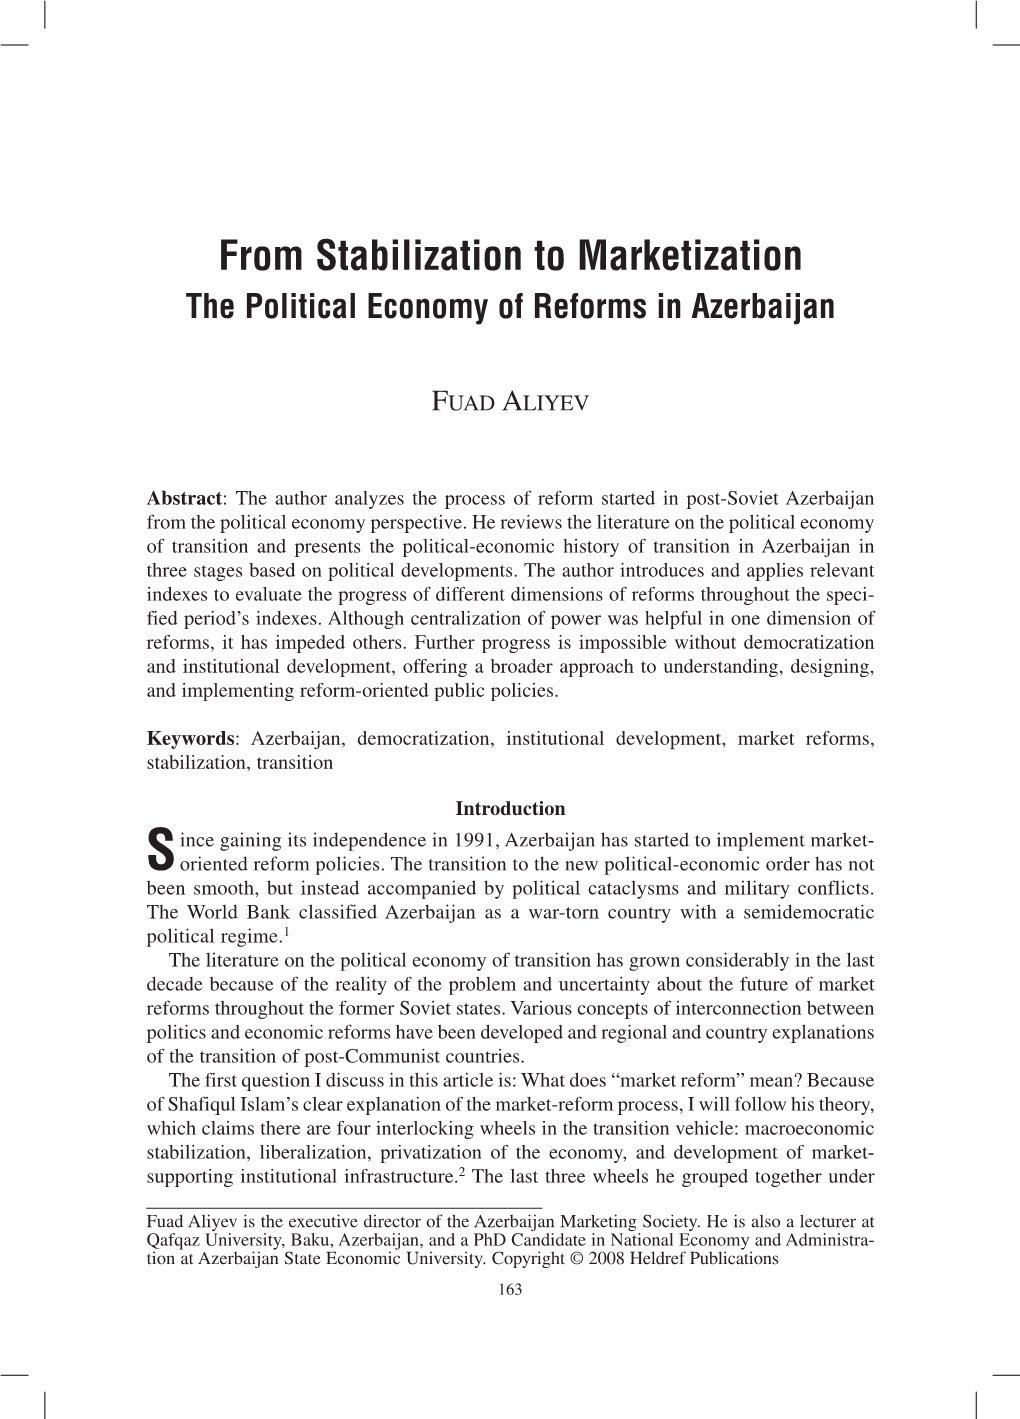 From Stabilization to Marketization the Political Economy of Reforms in Azerbaijan